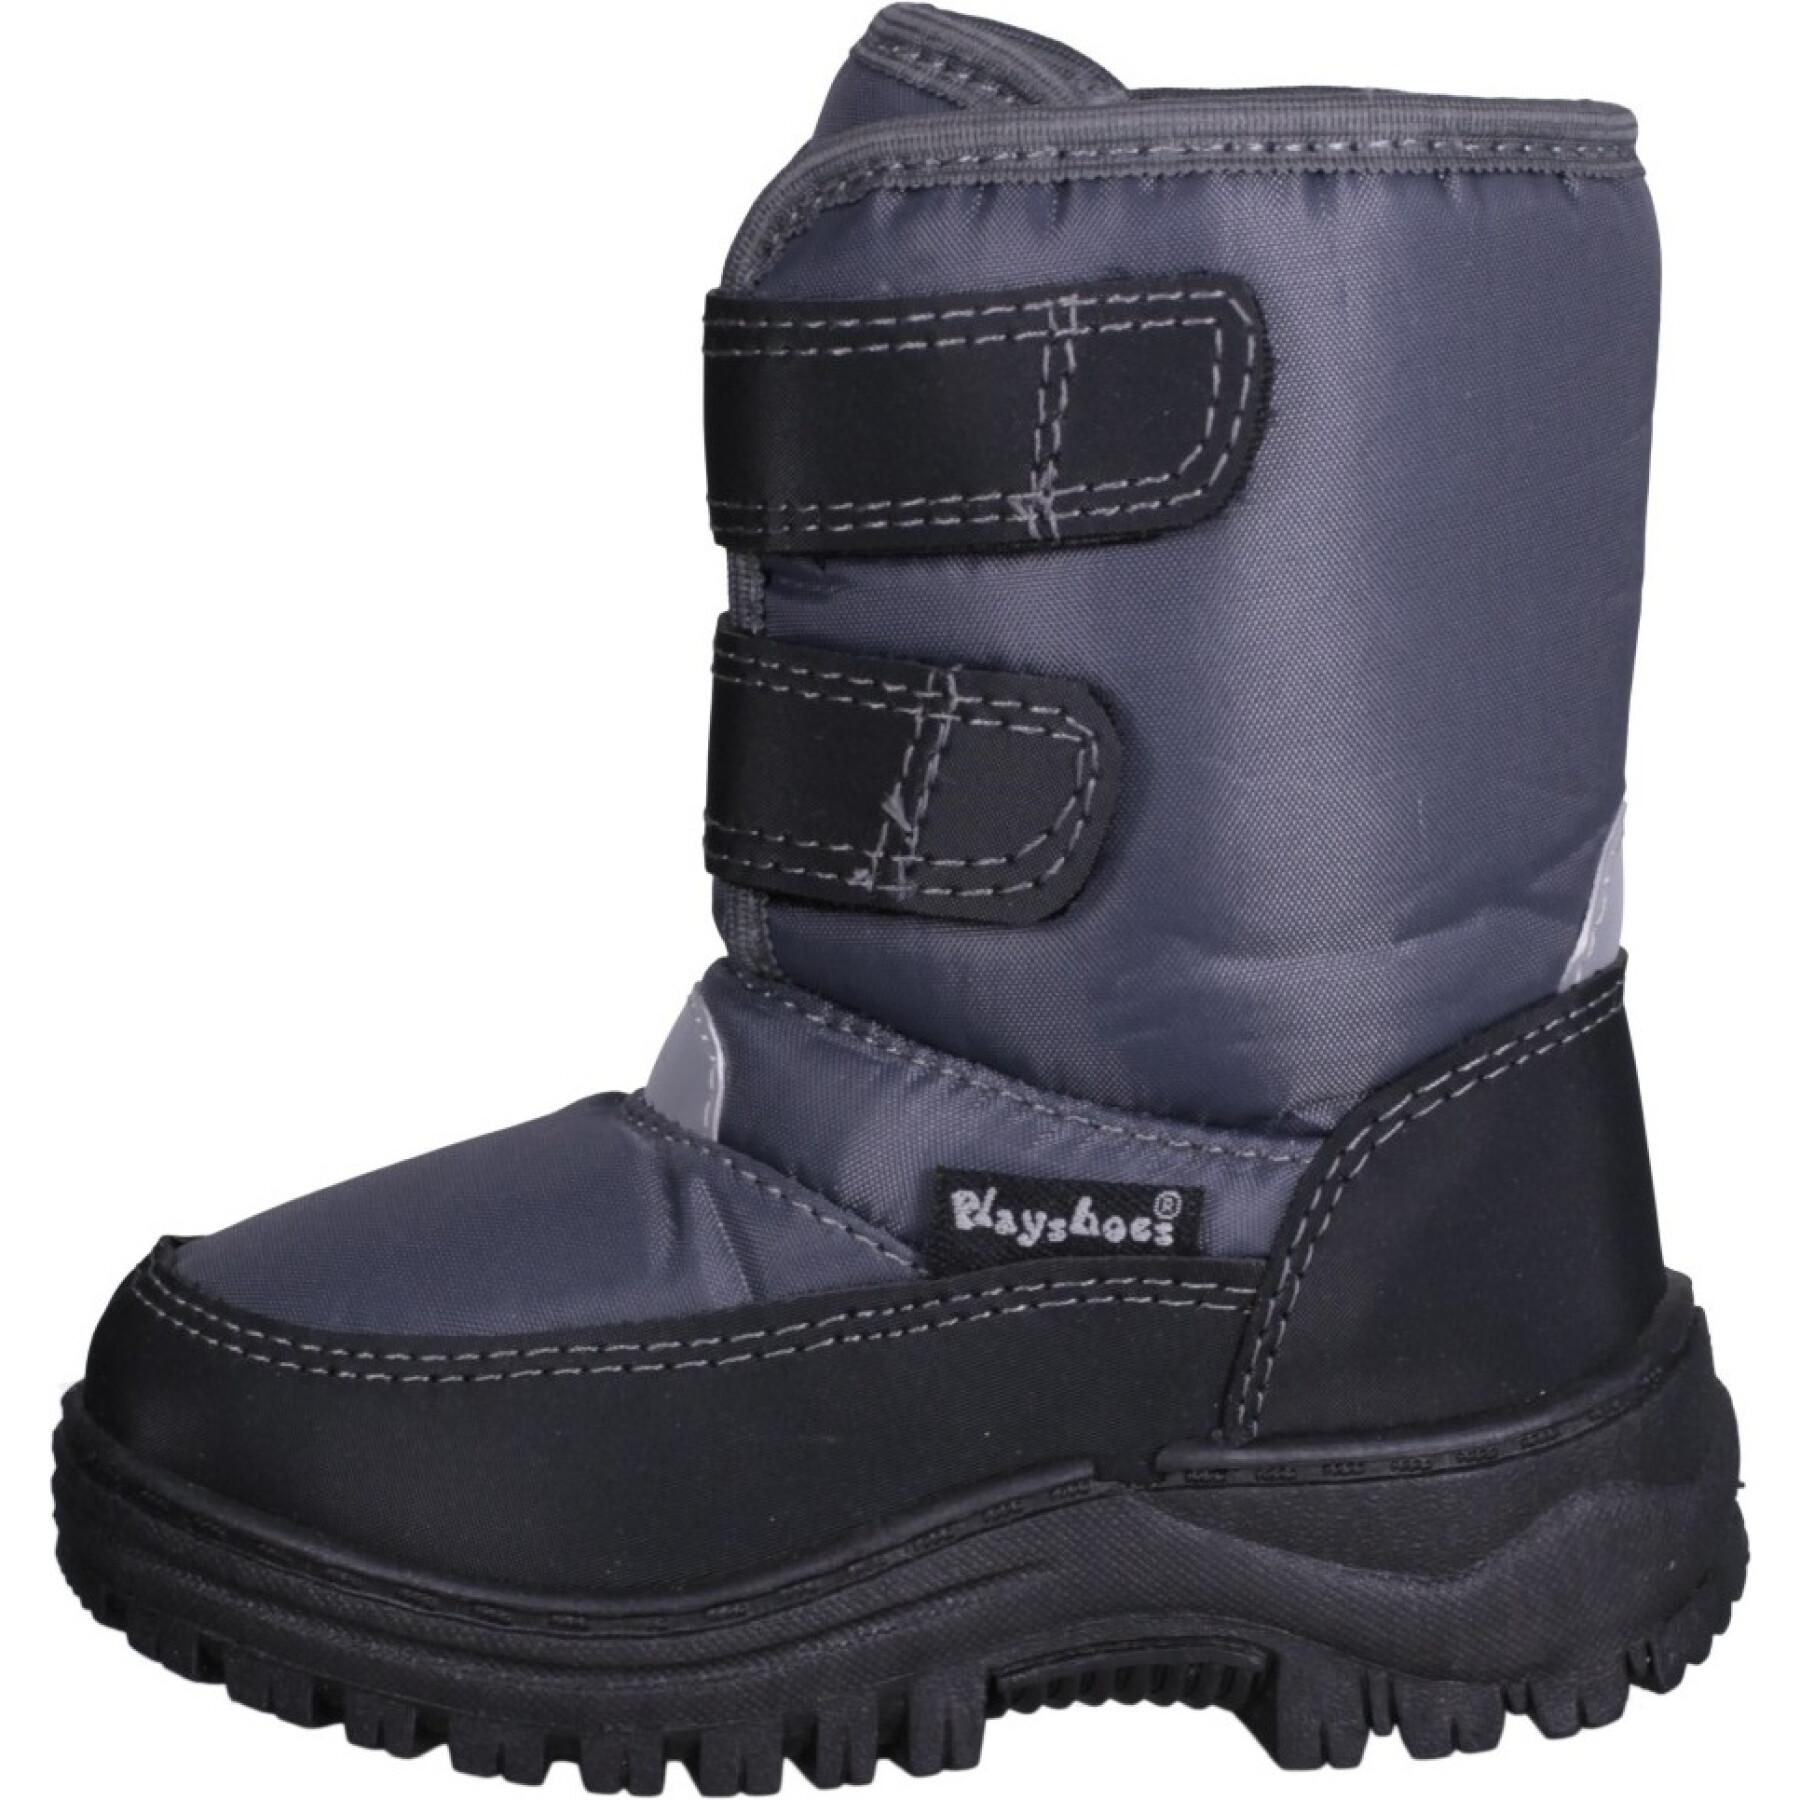 Children's hook-and-loop winter boots Playshoes